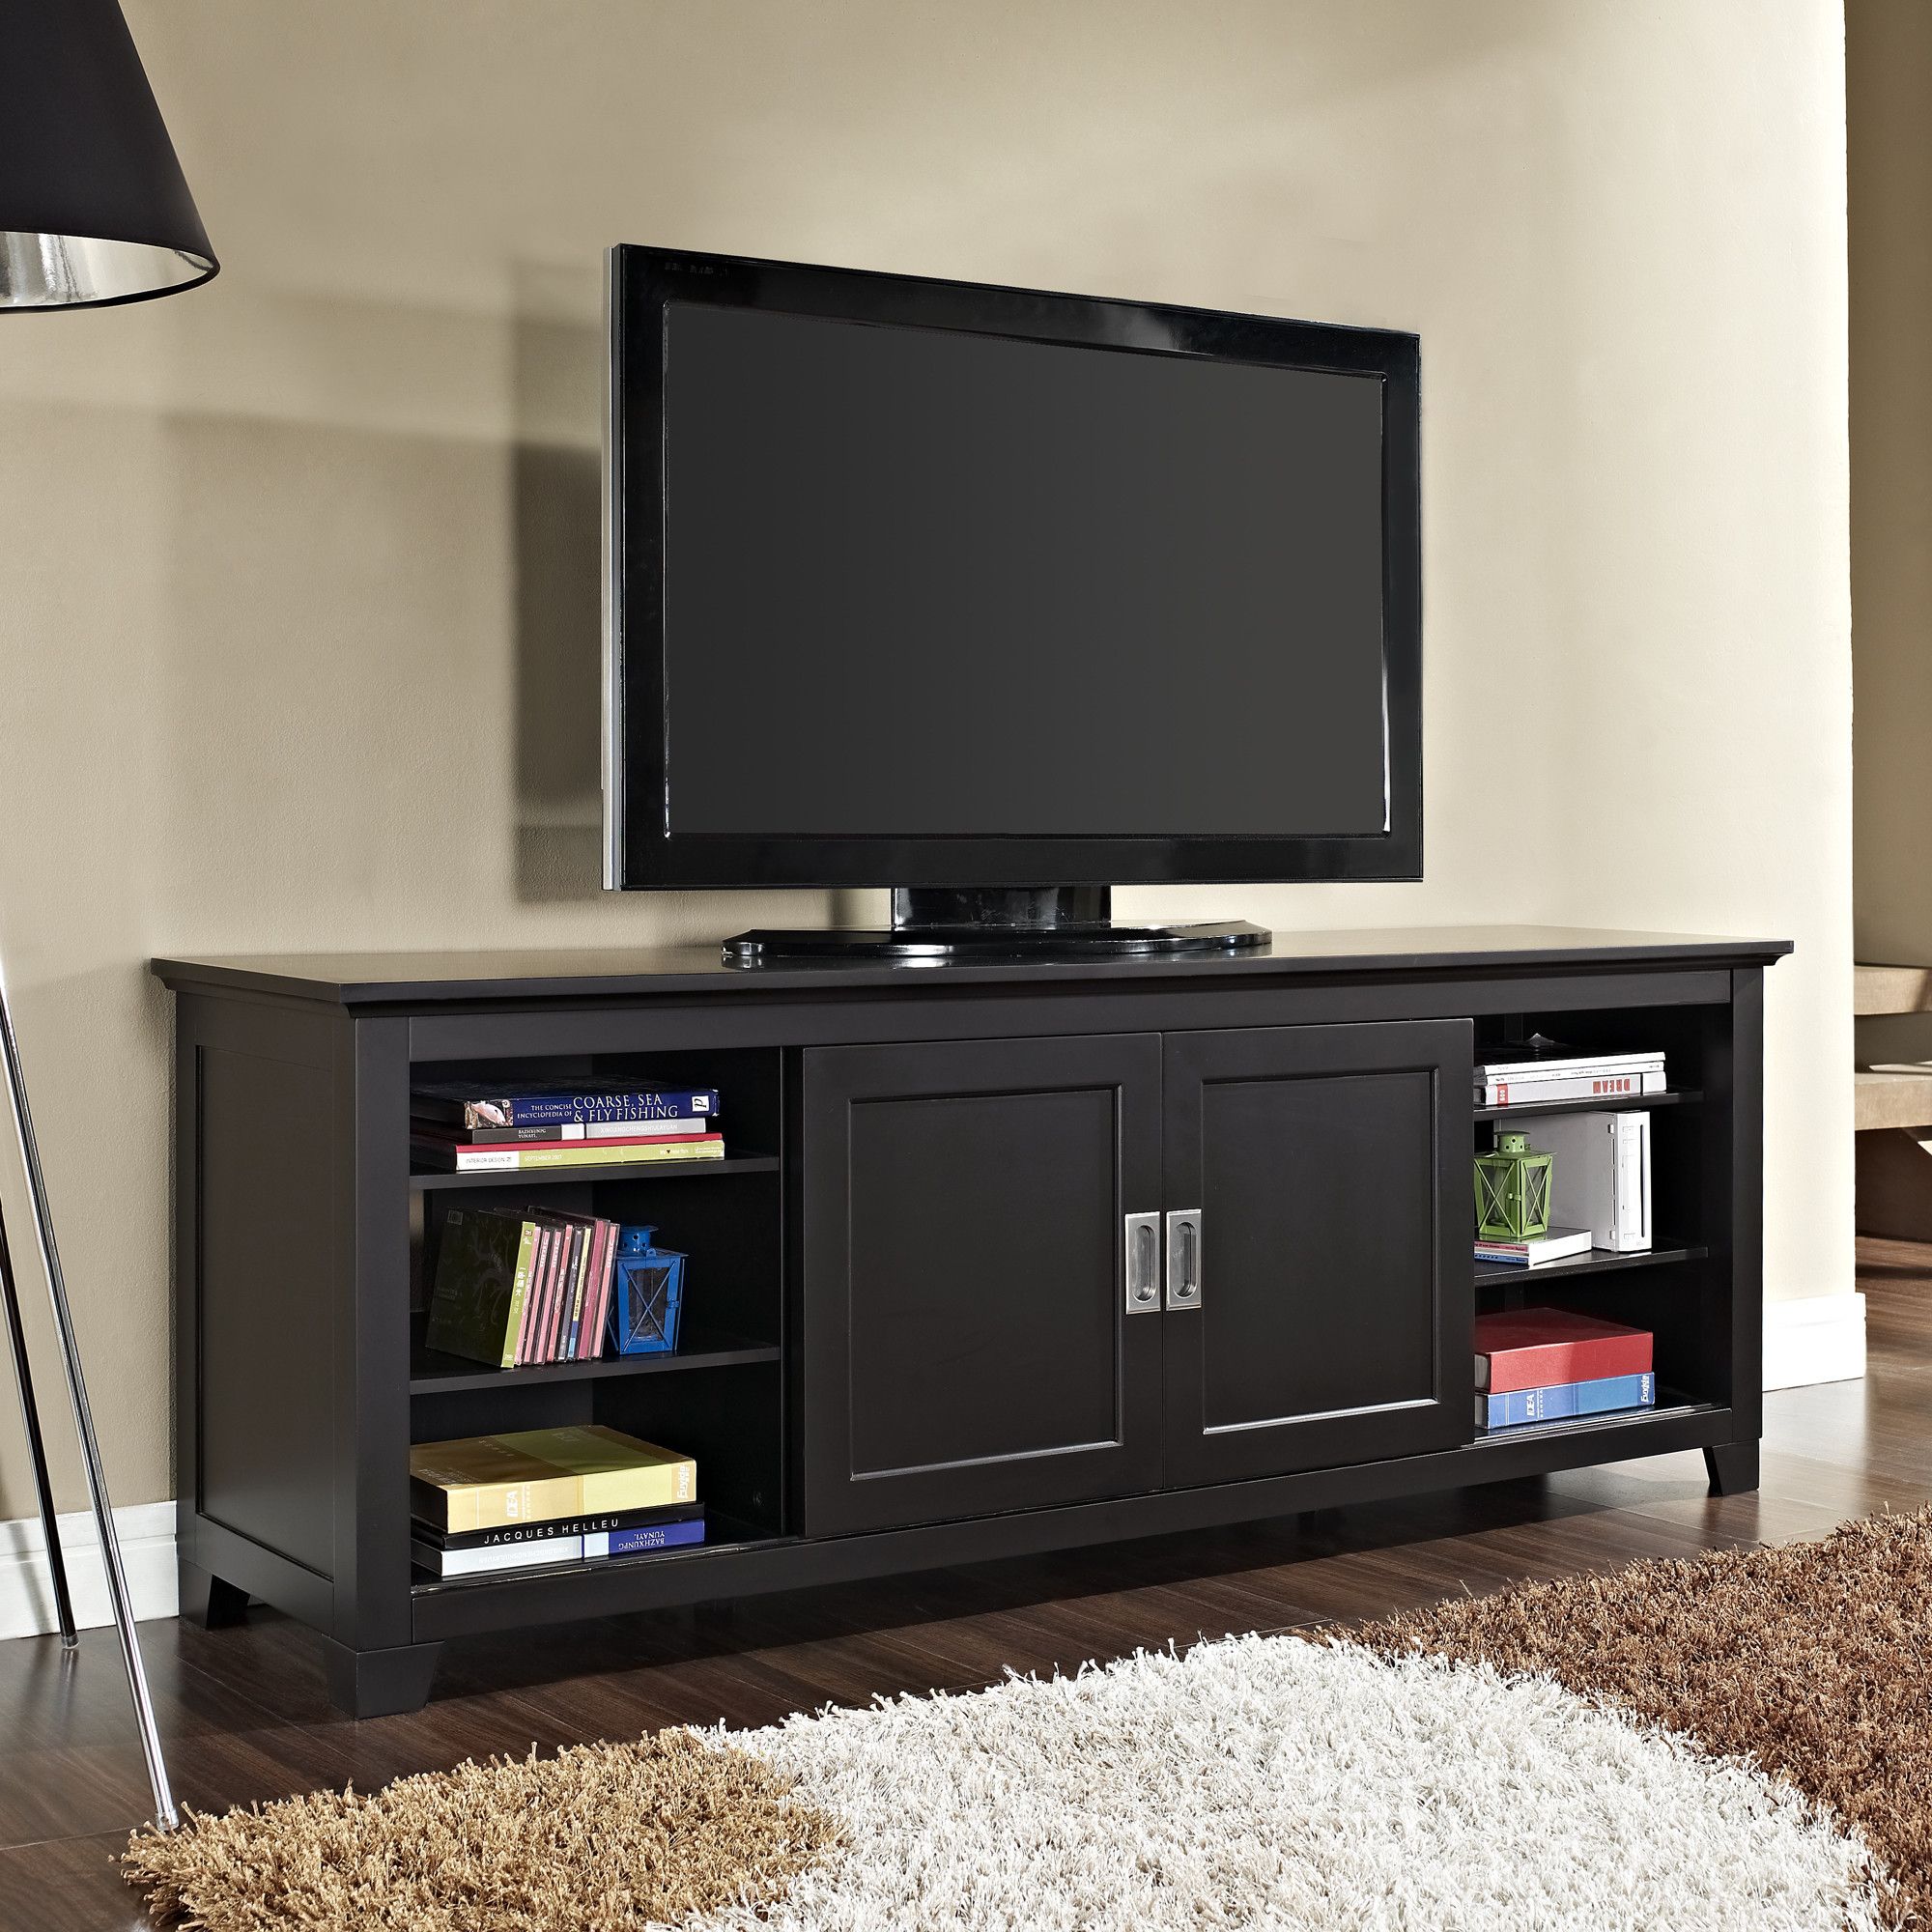 Wooden Sliding Tv Stand | Keko Furniture In Wooden Tv Stands (View 15 of 15)